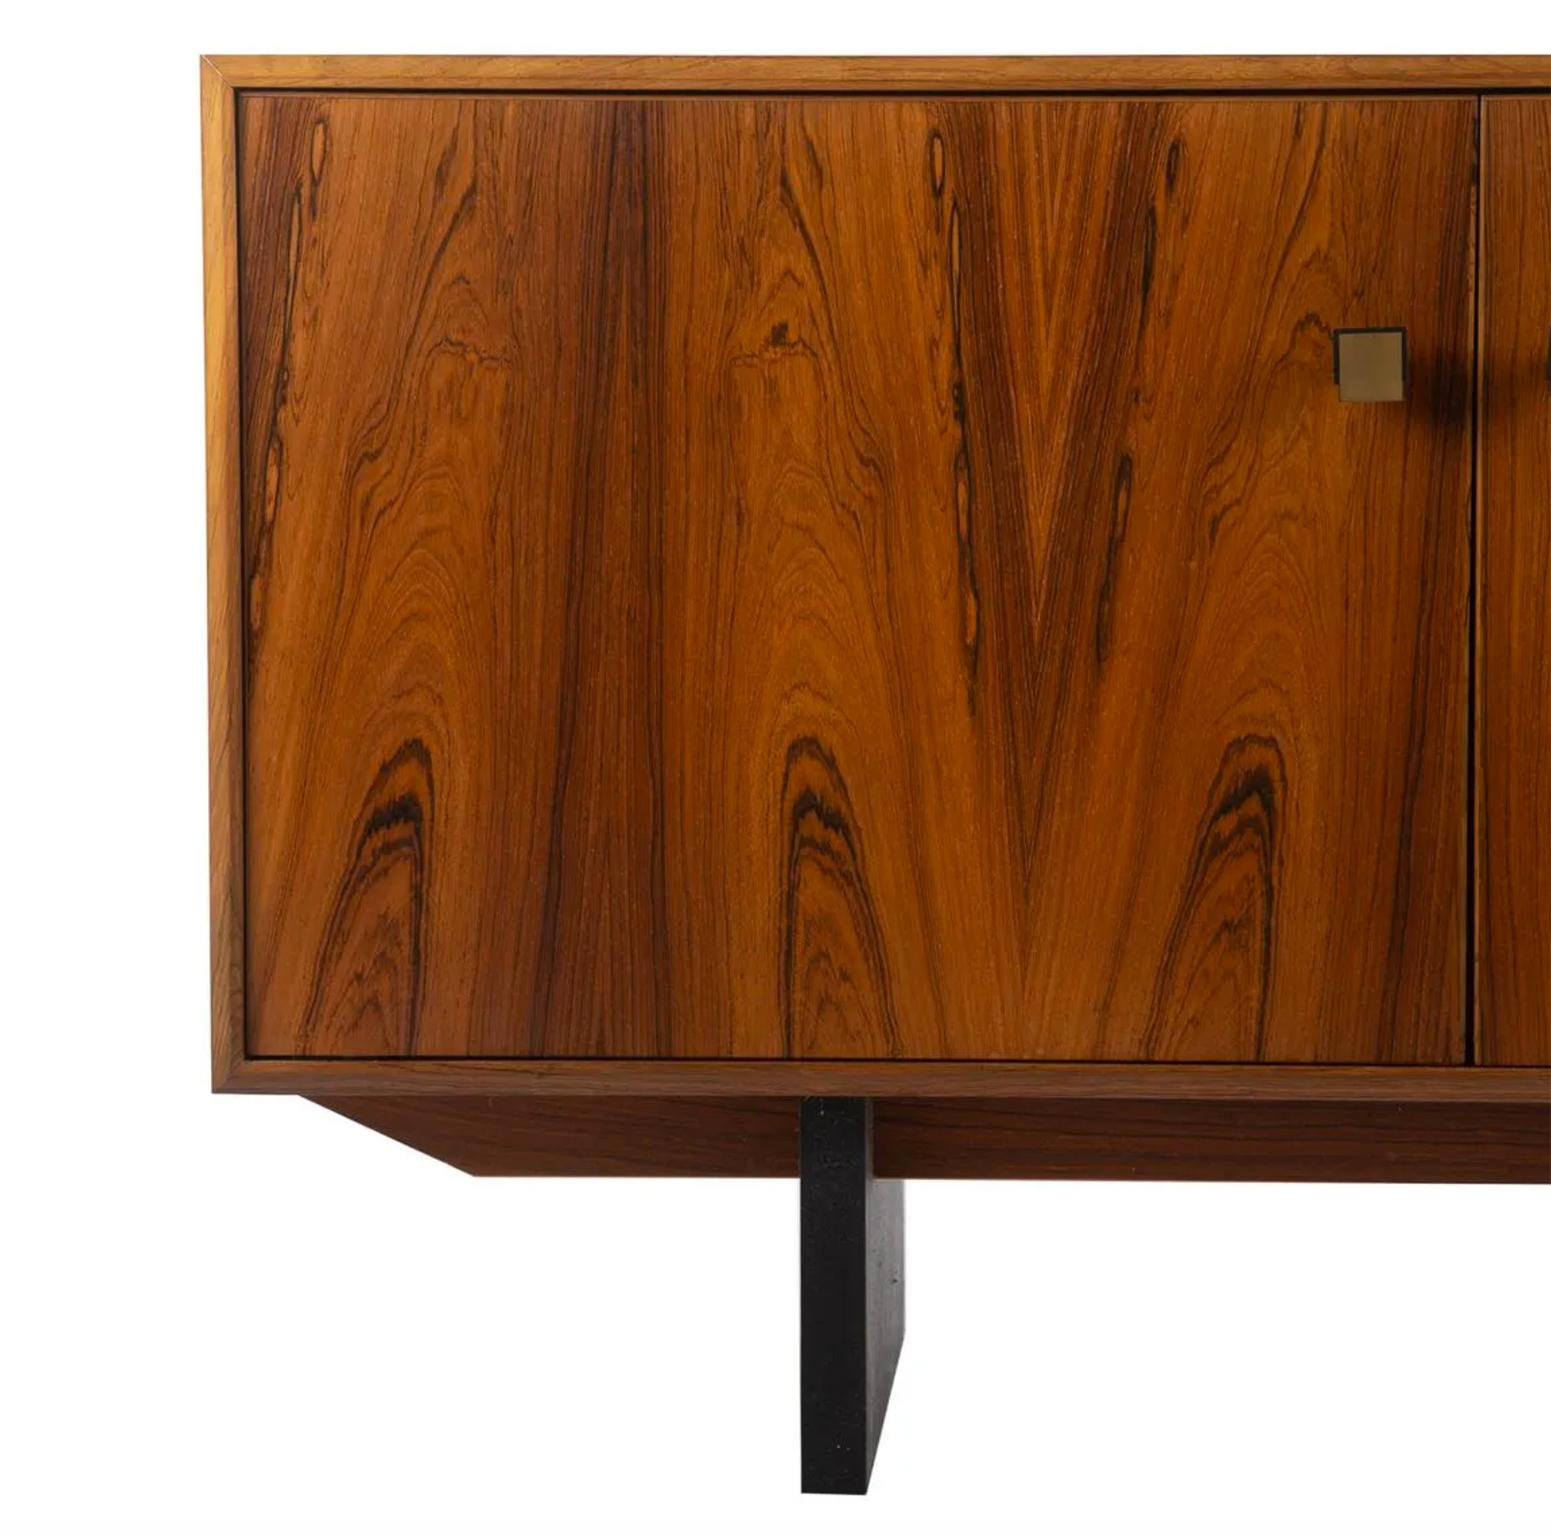 Mid century Danish modern rosewood 4 drawer credenza sideboard dresser cabinet. Has 4 drawers and 2 cabinet doors with brass pulls. Black Lacquer base. Beautiful Rosewood grain. Made In Denmark. Located in Brooklyn NYC.